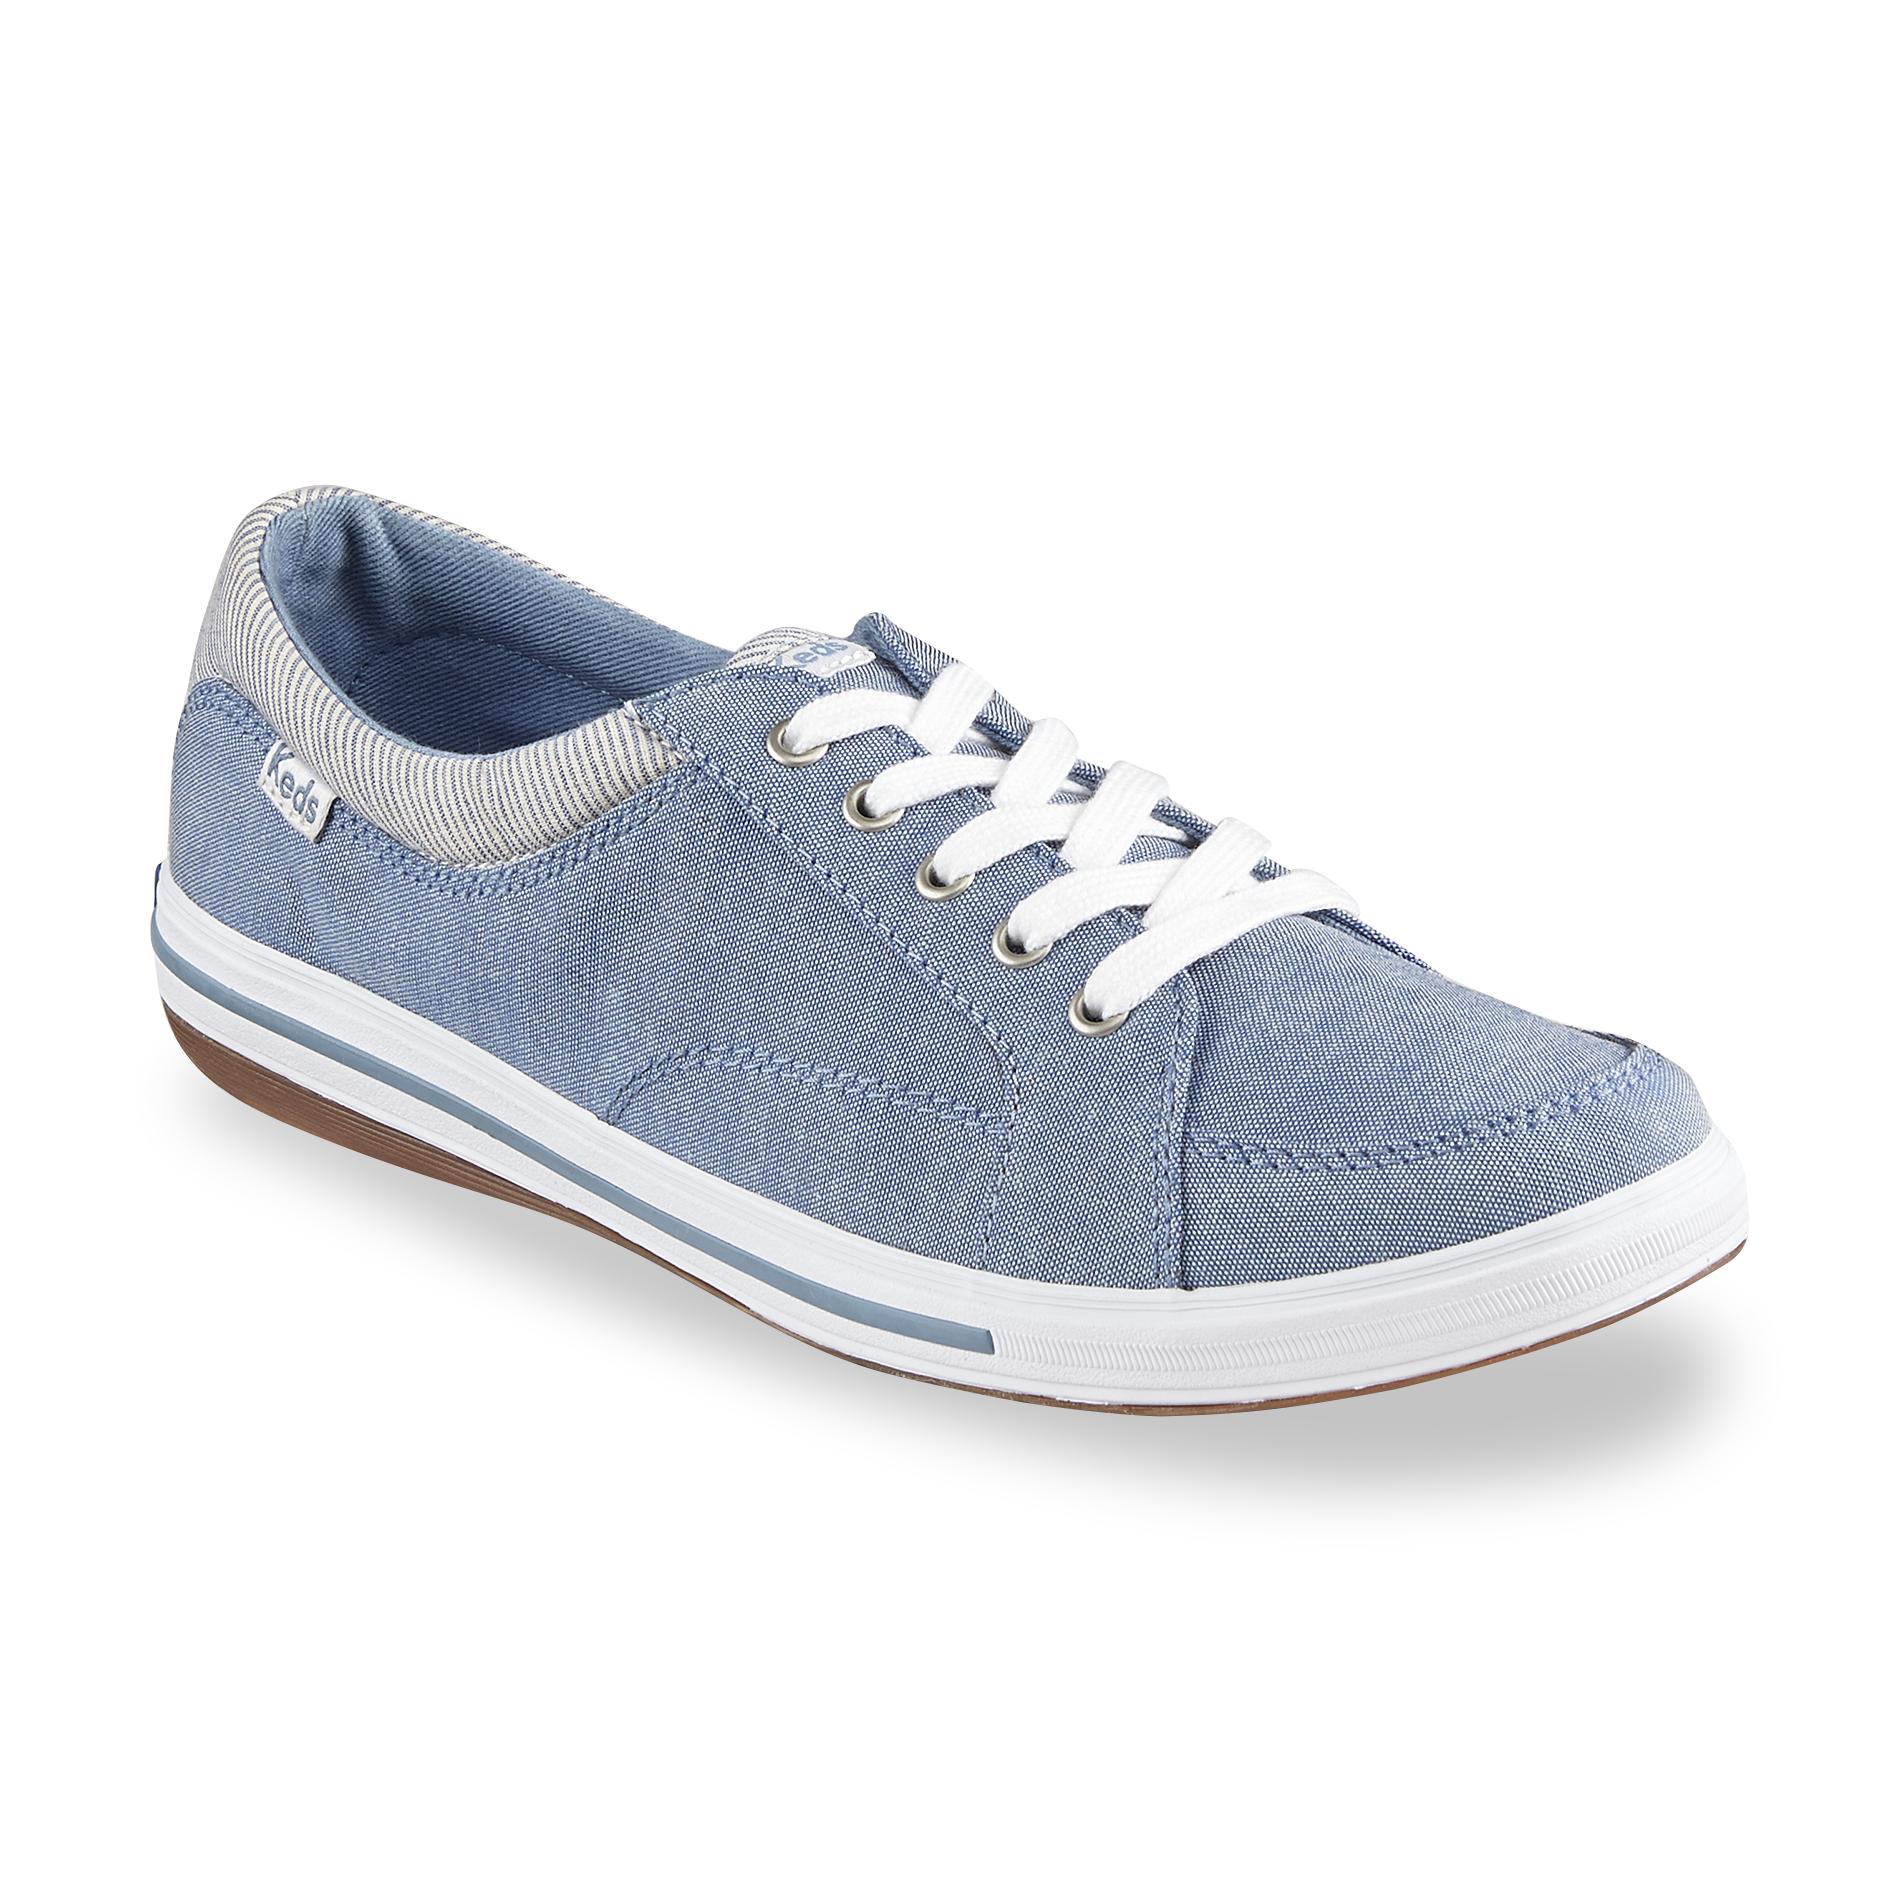 Keds Women's Vollie Blue/White Lace-Up Sneakers